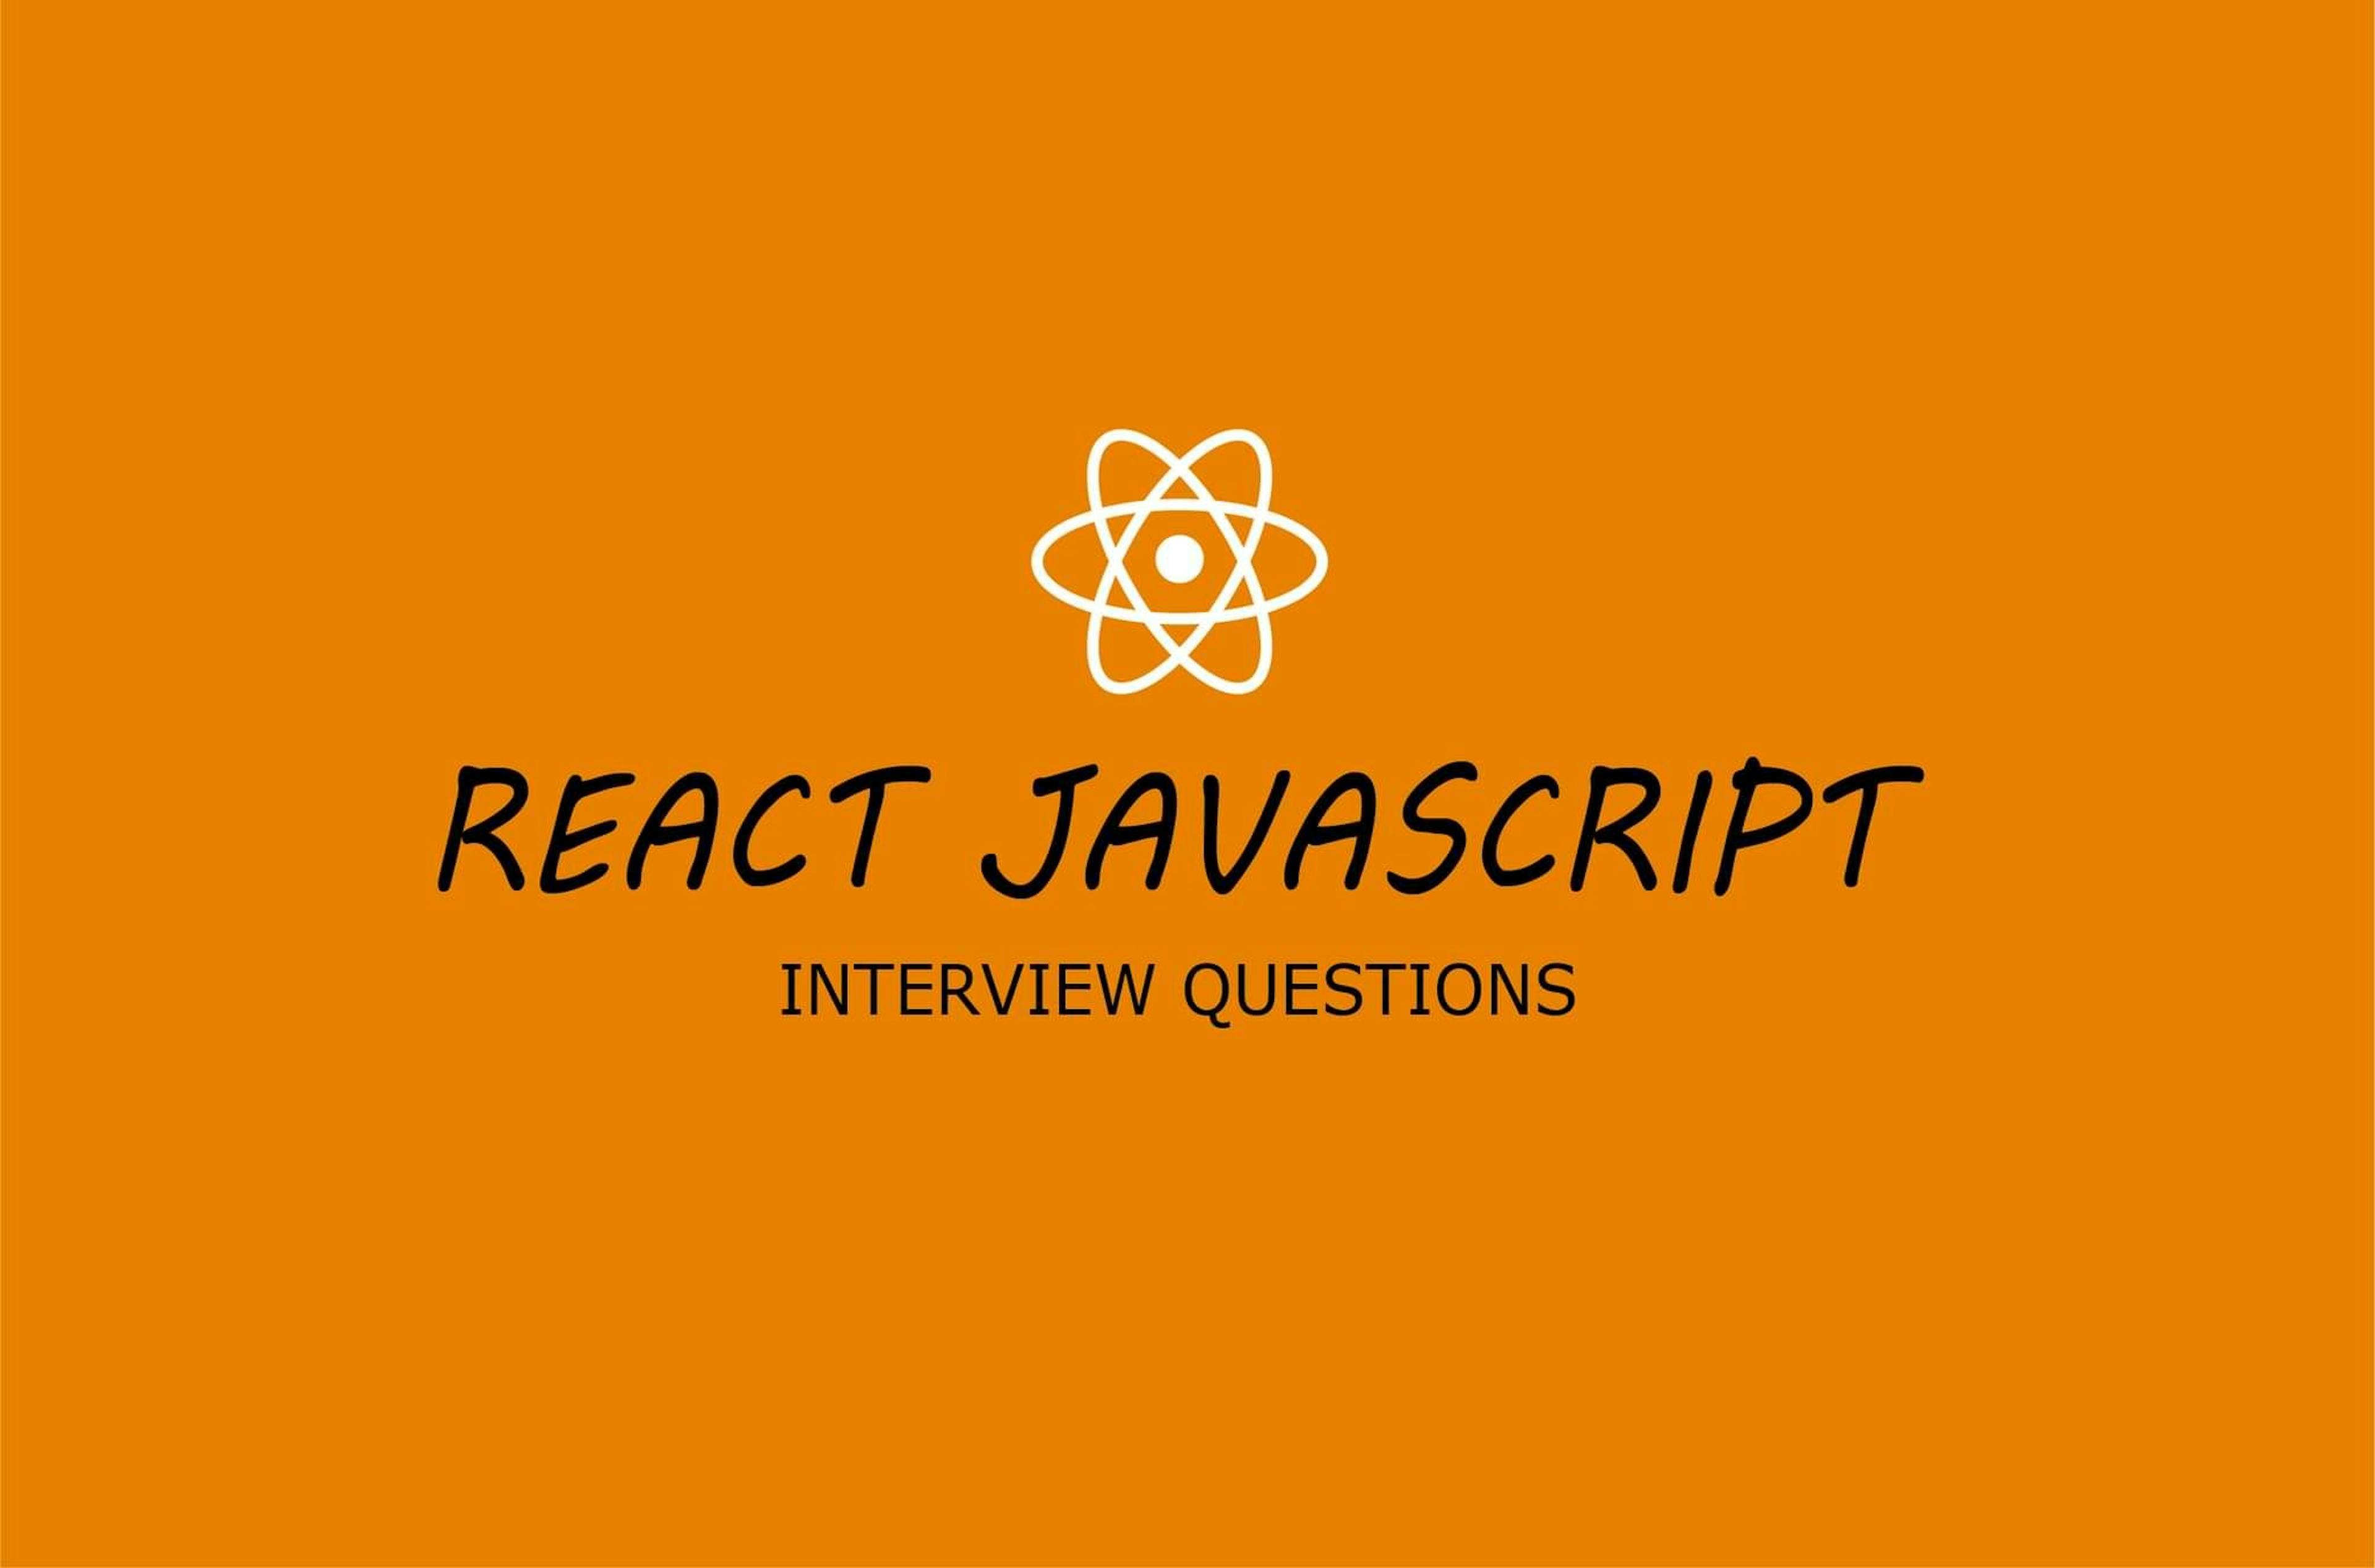 featured image - Top 5 Interview Questions for Beginner React Developers